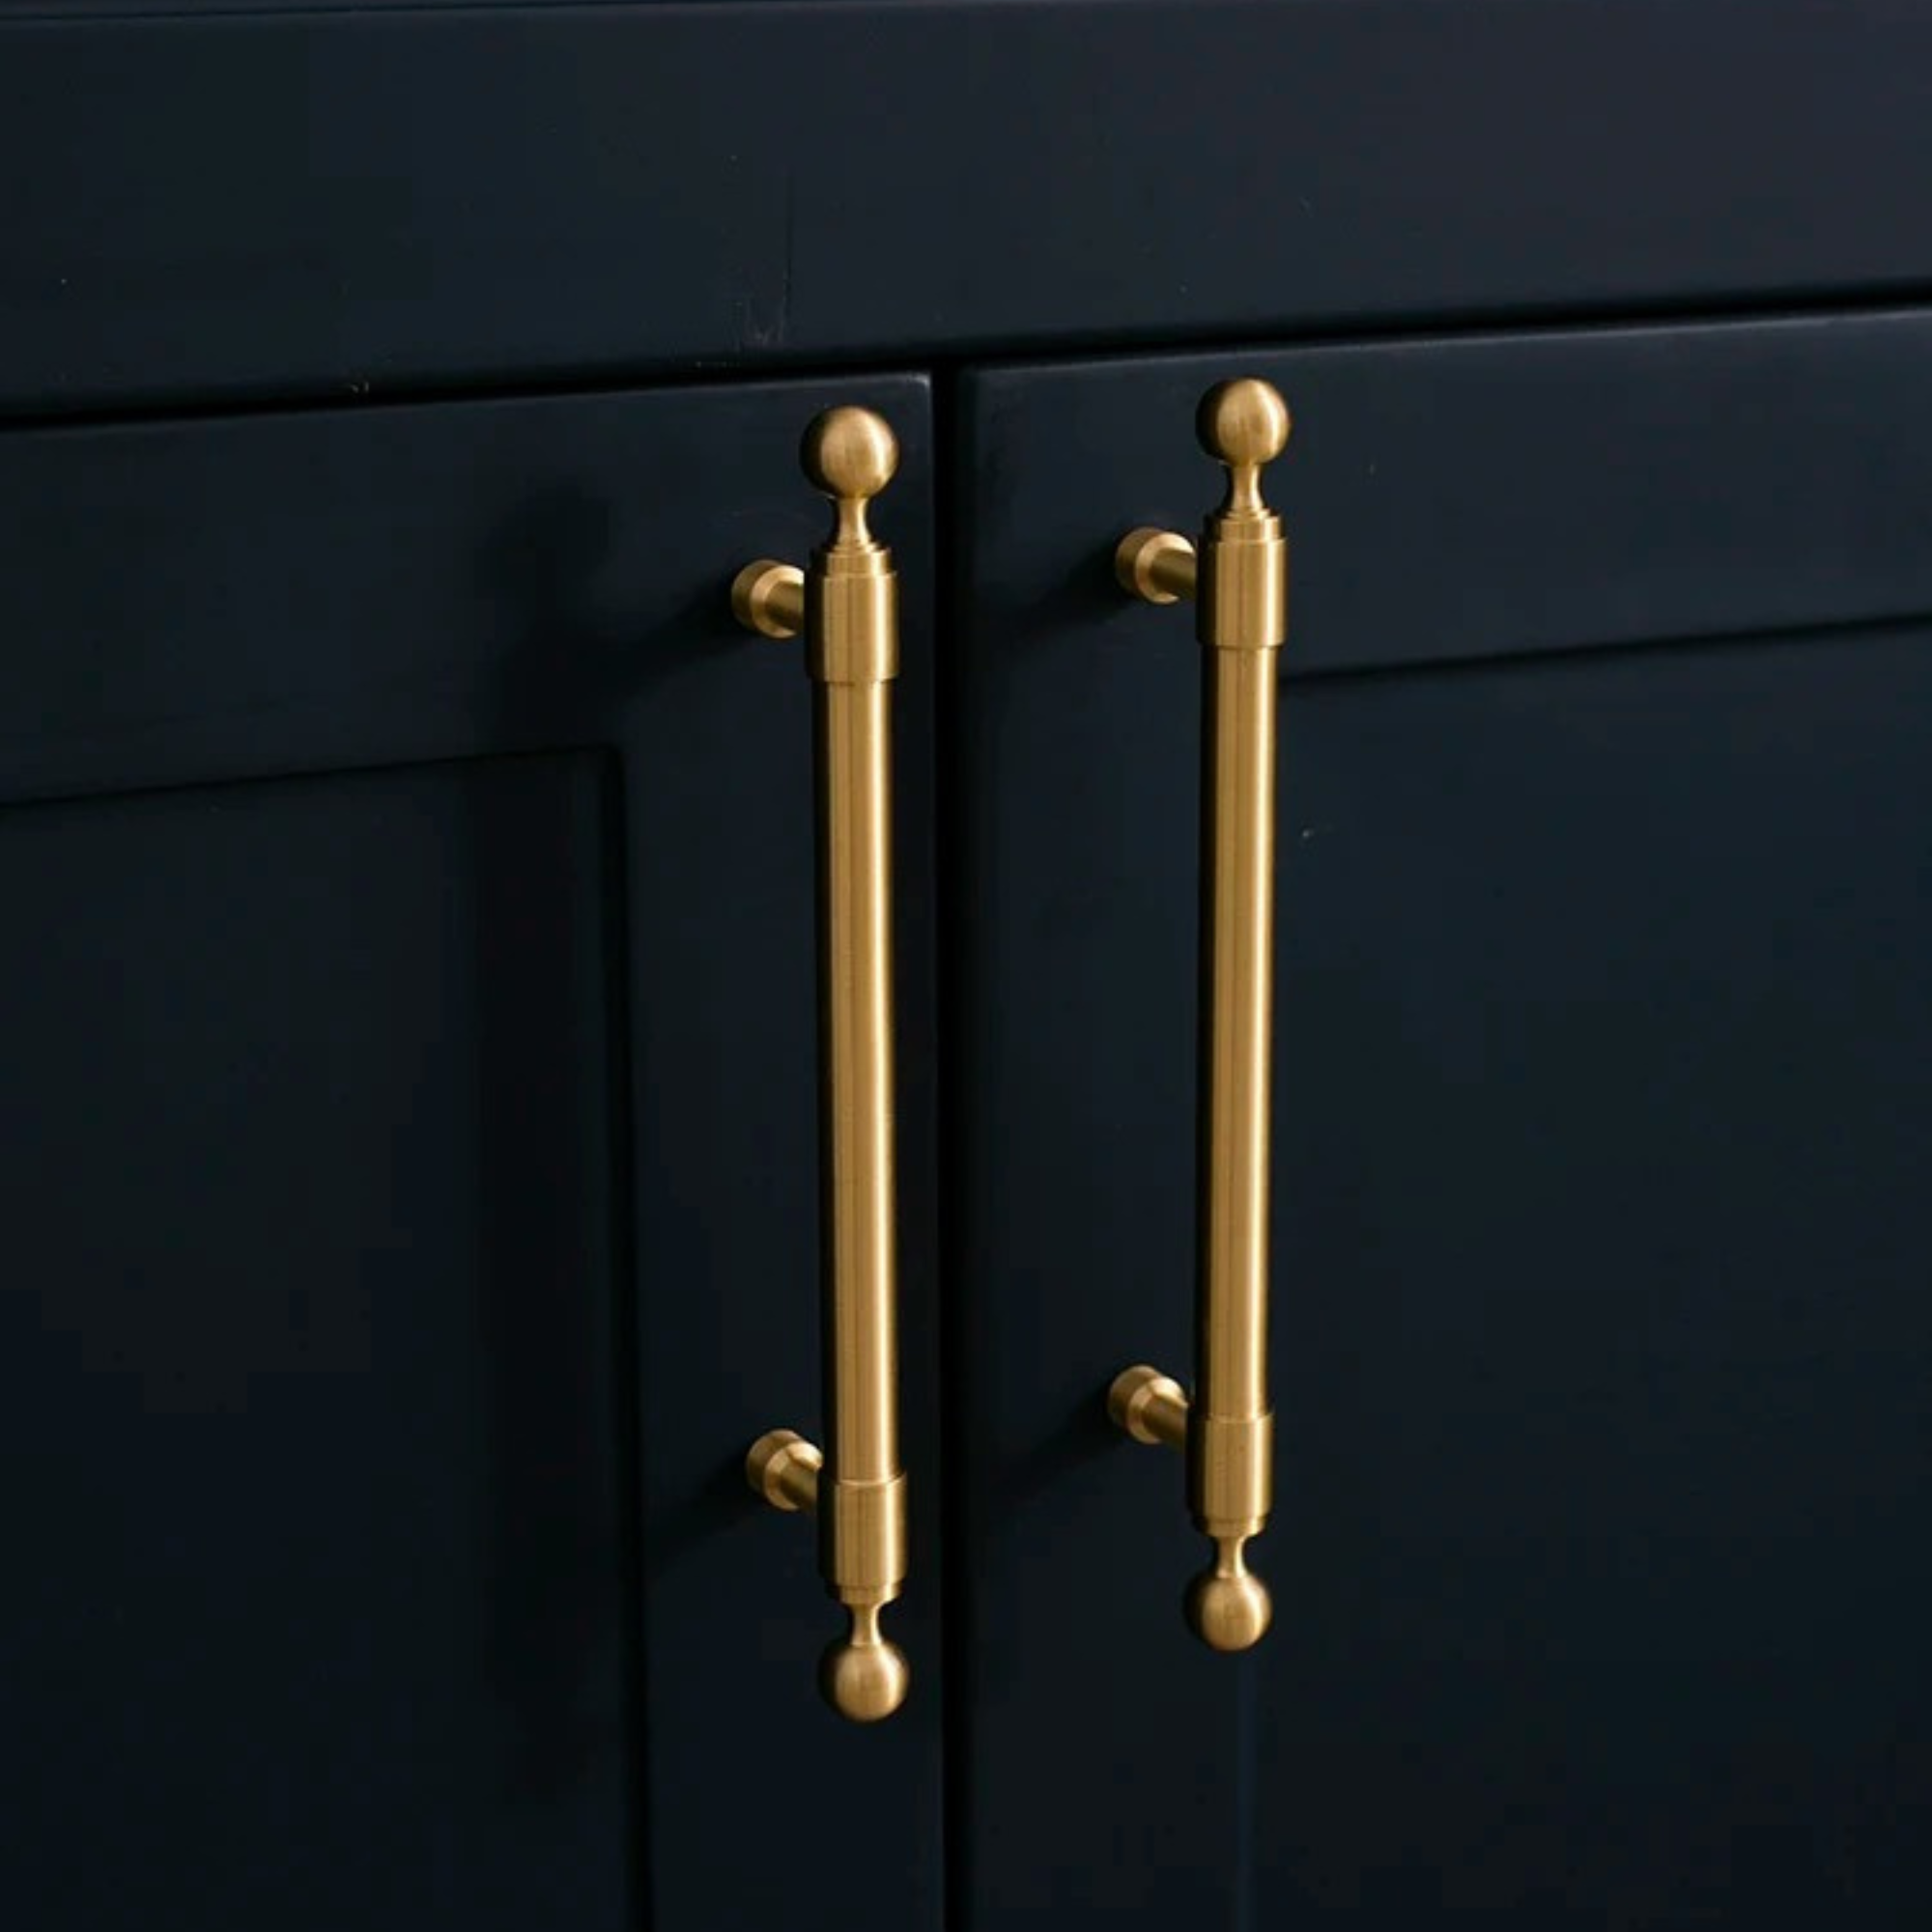 Brushed Brass Pulls With Sphere End | Sphaera